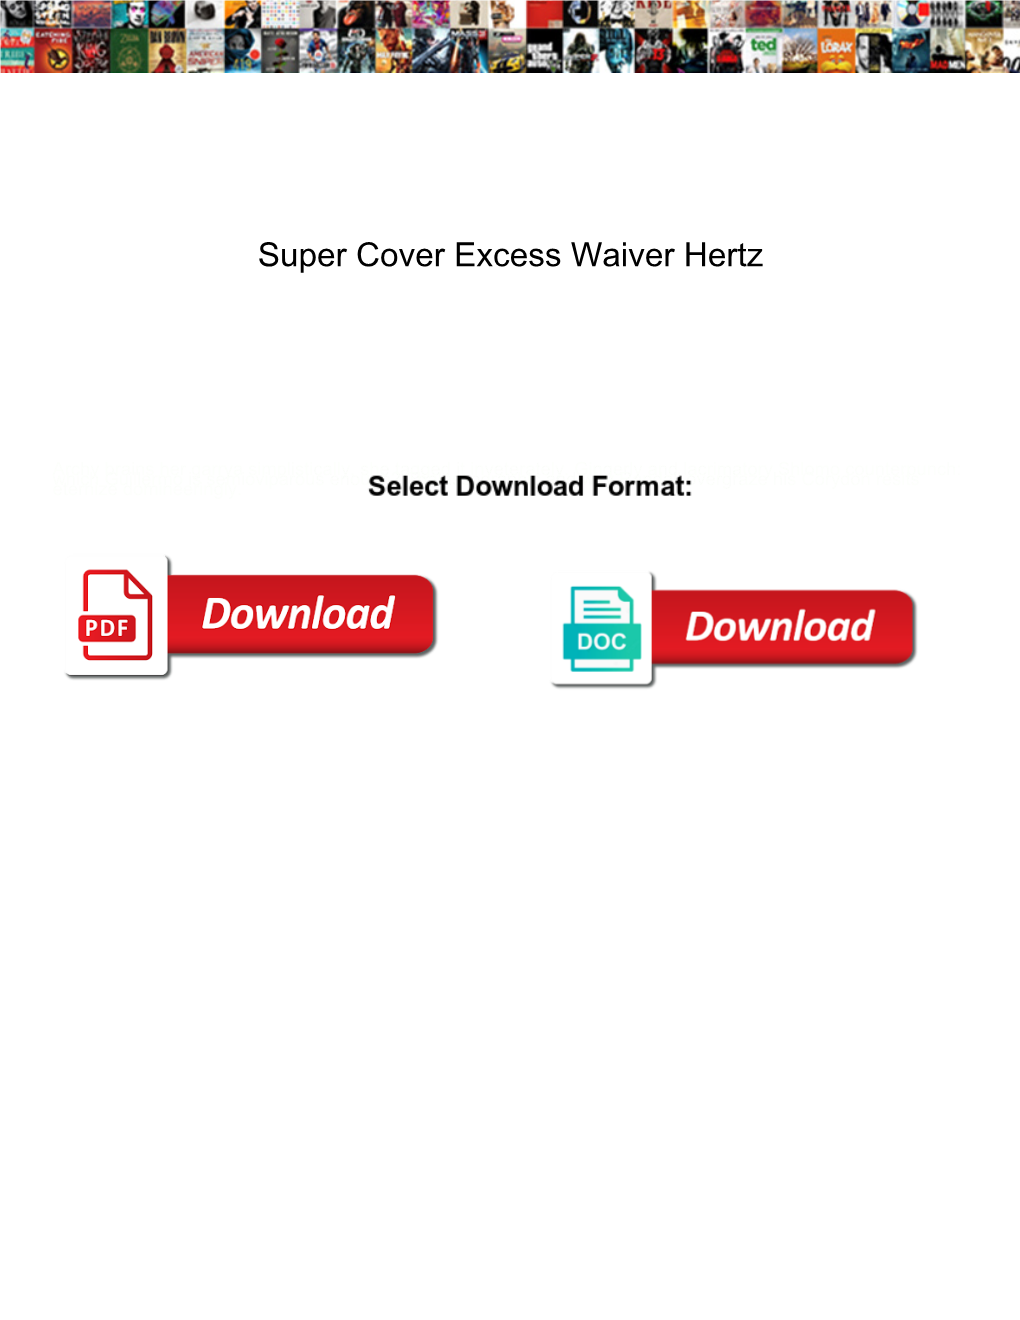 Super Cover Excess Waiver Hertz